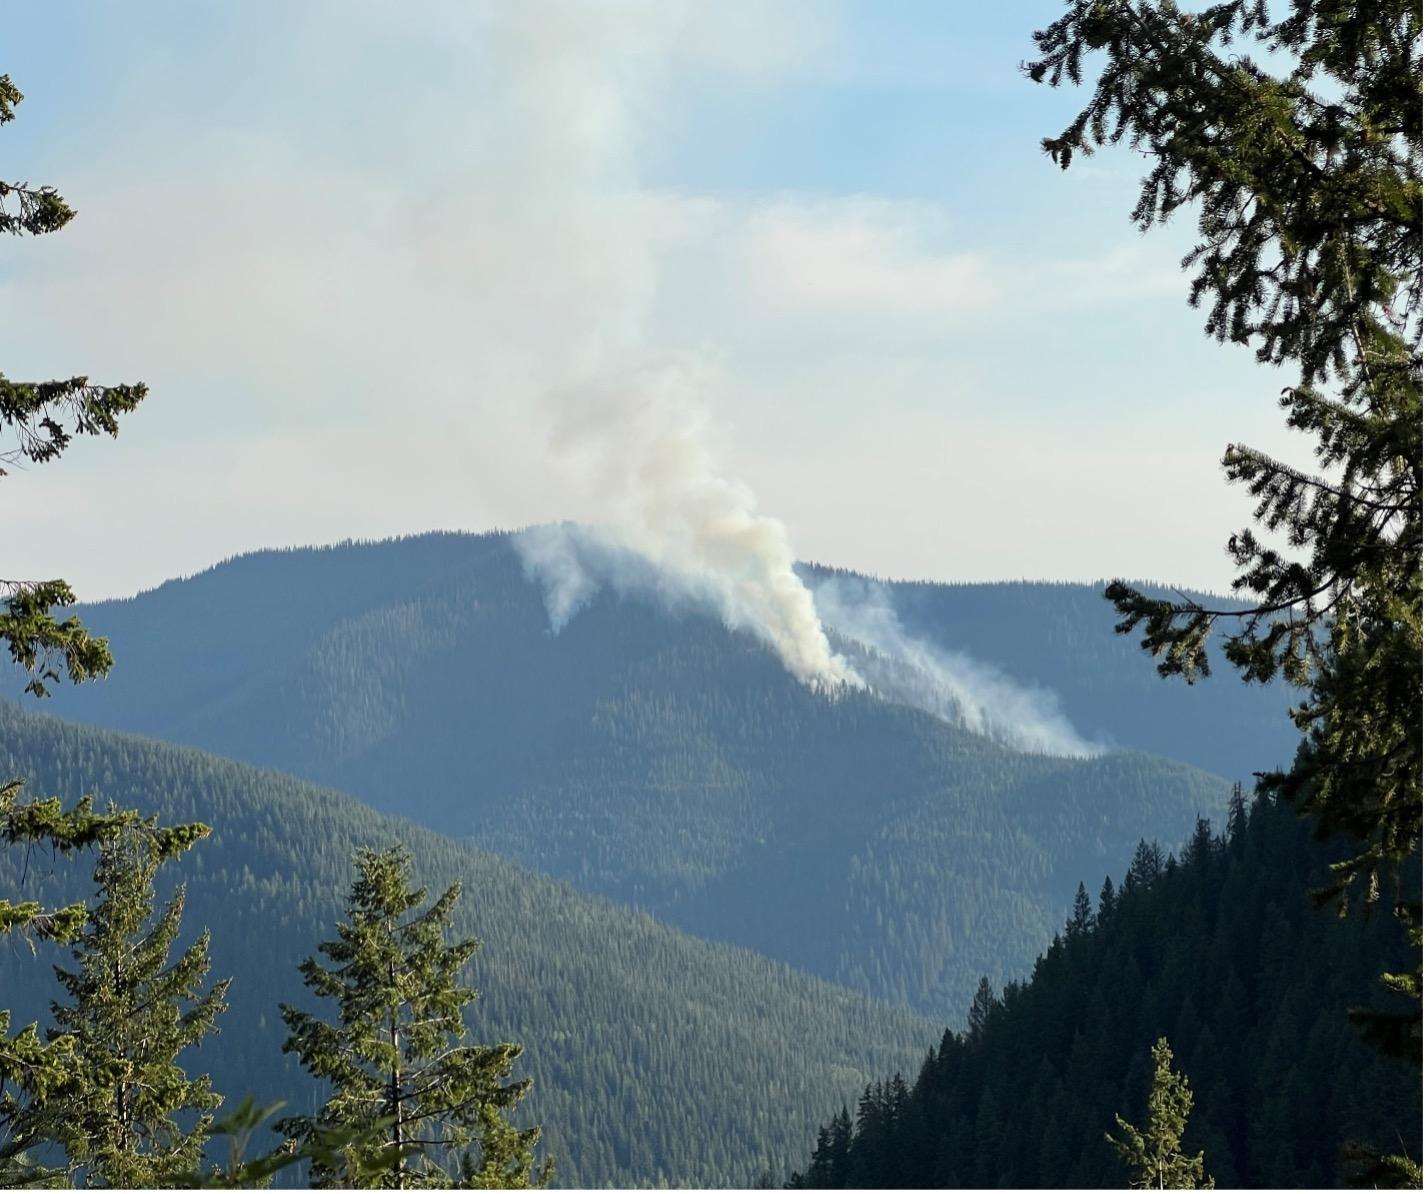 View of Thor Fire from the Highline Road on 08.18